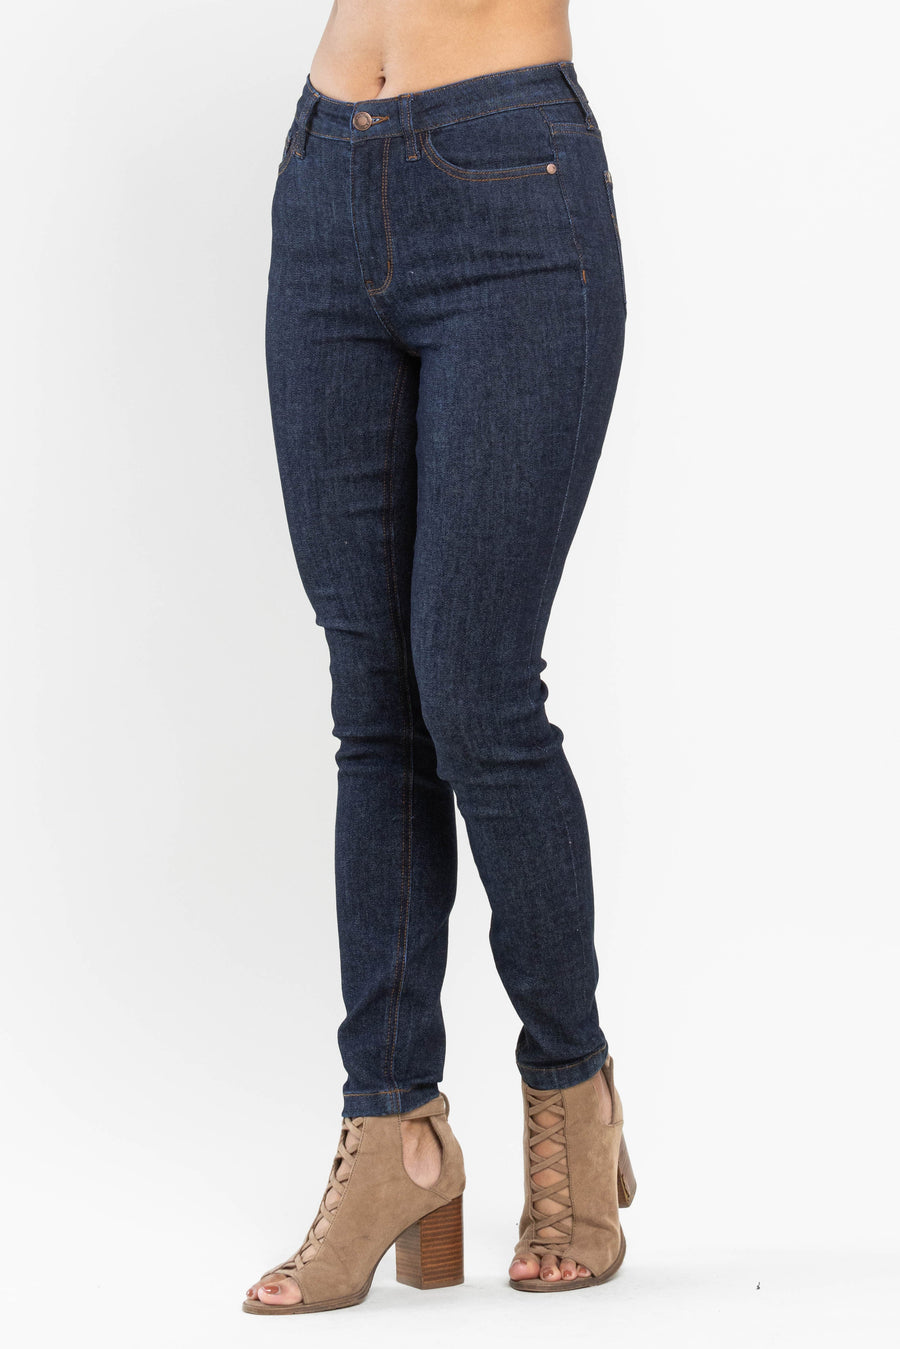 Holly HW Classic Back Pocket Embroidery Skinny - PLUS